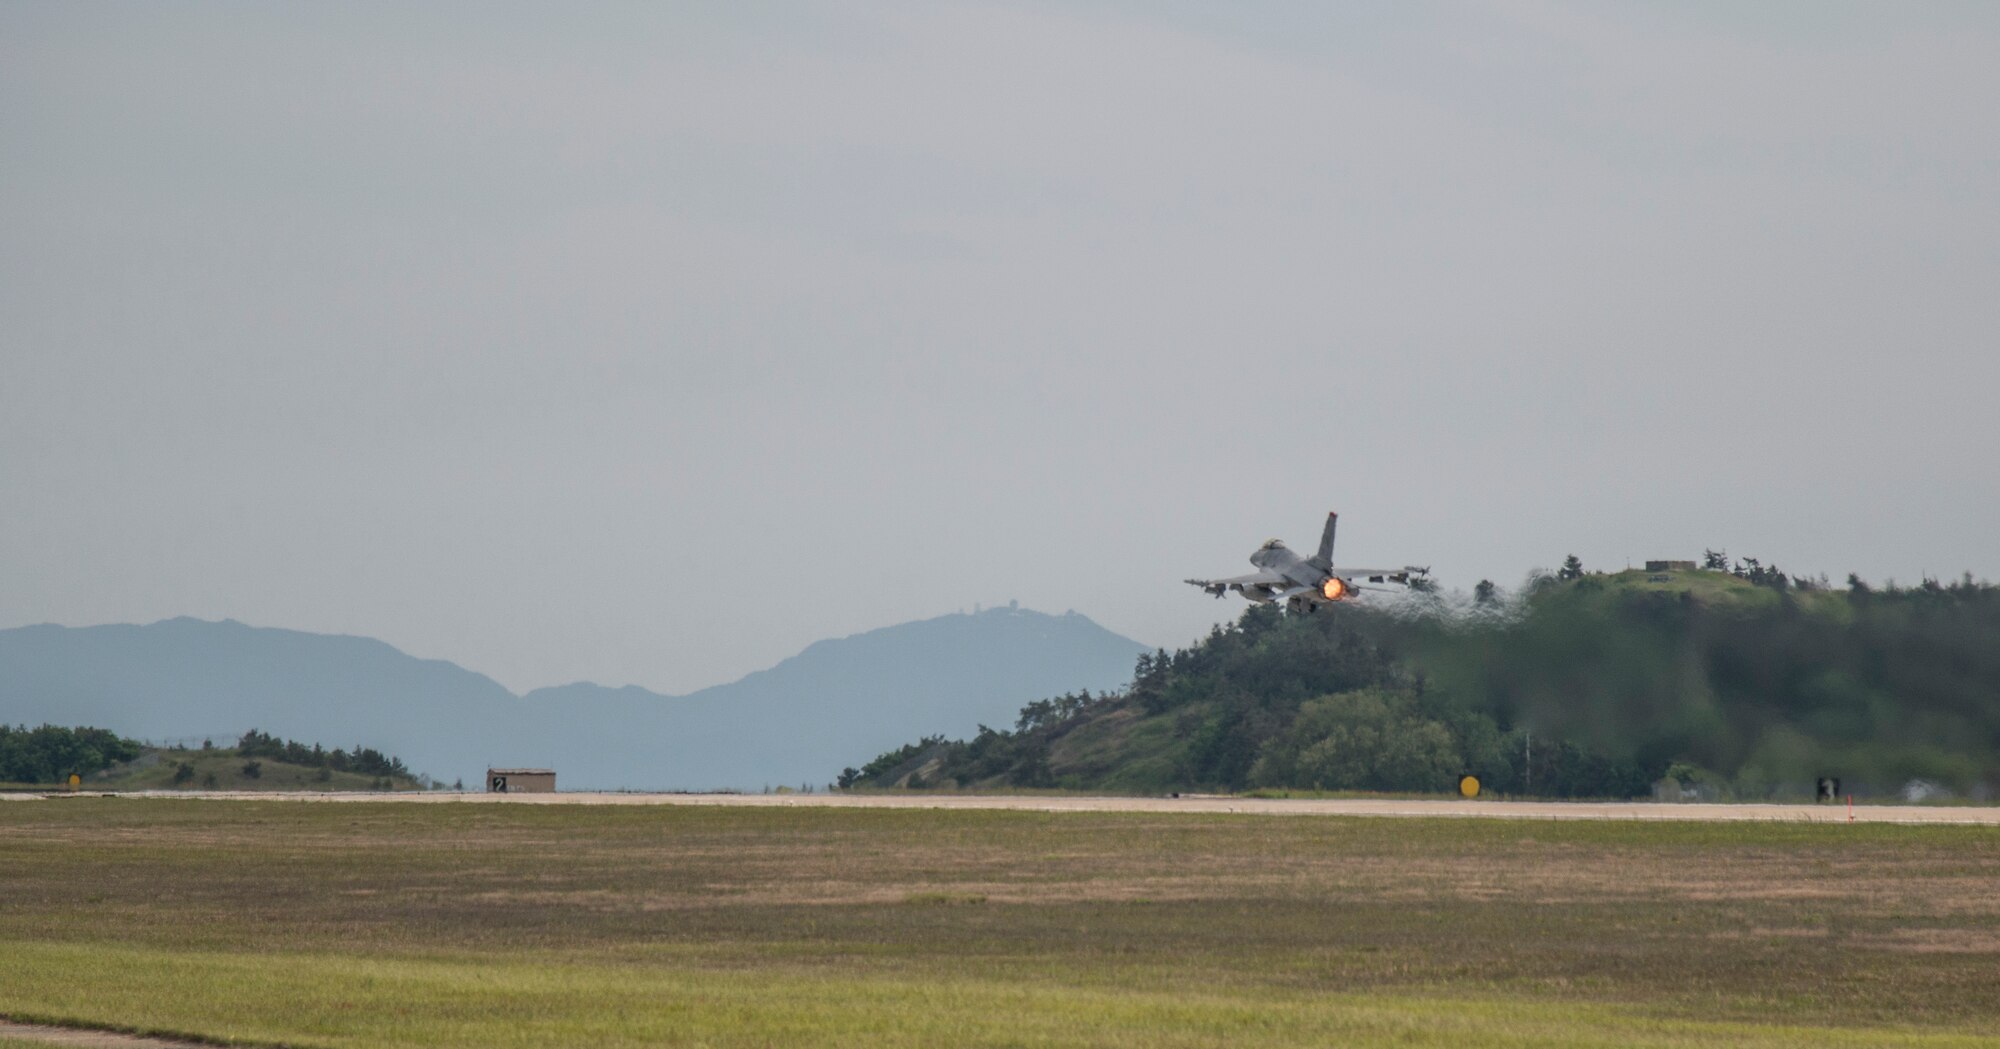 A F-16 Fighting Falcon with the 14th Fighter Squadron takes-off at Kunsan Air Base, Republic of Korea, May 16, 2017. Due to routine flight line maintenance at Misawa Air Base, Japan, the 14th FS relocated to Kunsan AB, integrating operations with the 80th FS. By relocating to other bases, maintenance teams and pilots can continue training with allies and partners by conducting day-to-day operations until runway maintenance at Misawa AB is completed. (U.S. Air Force photo by Senior Airman Brittany A. Chase)